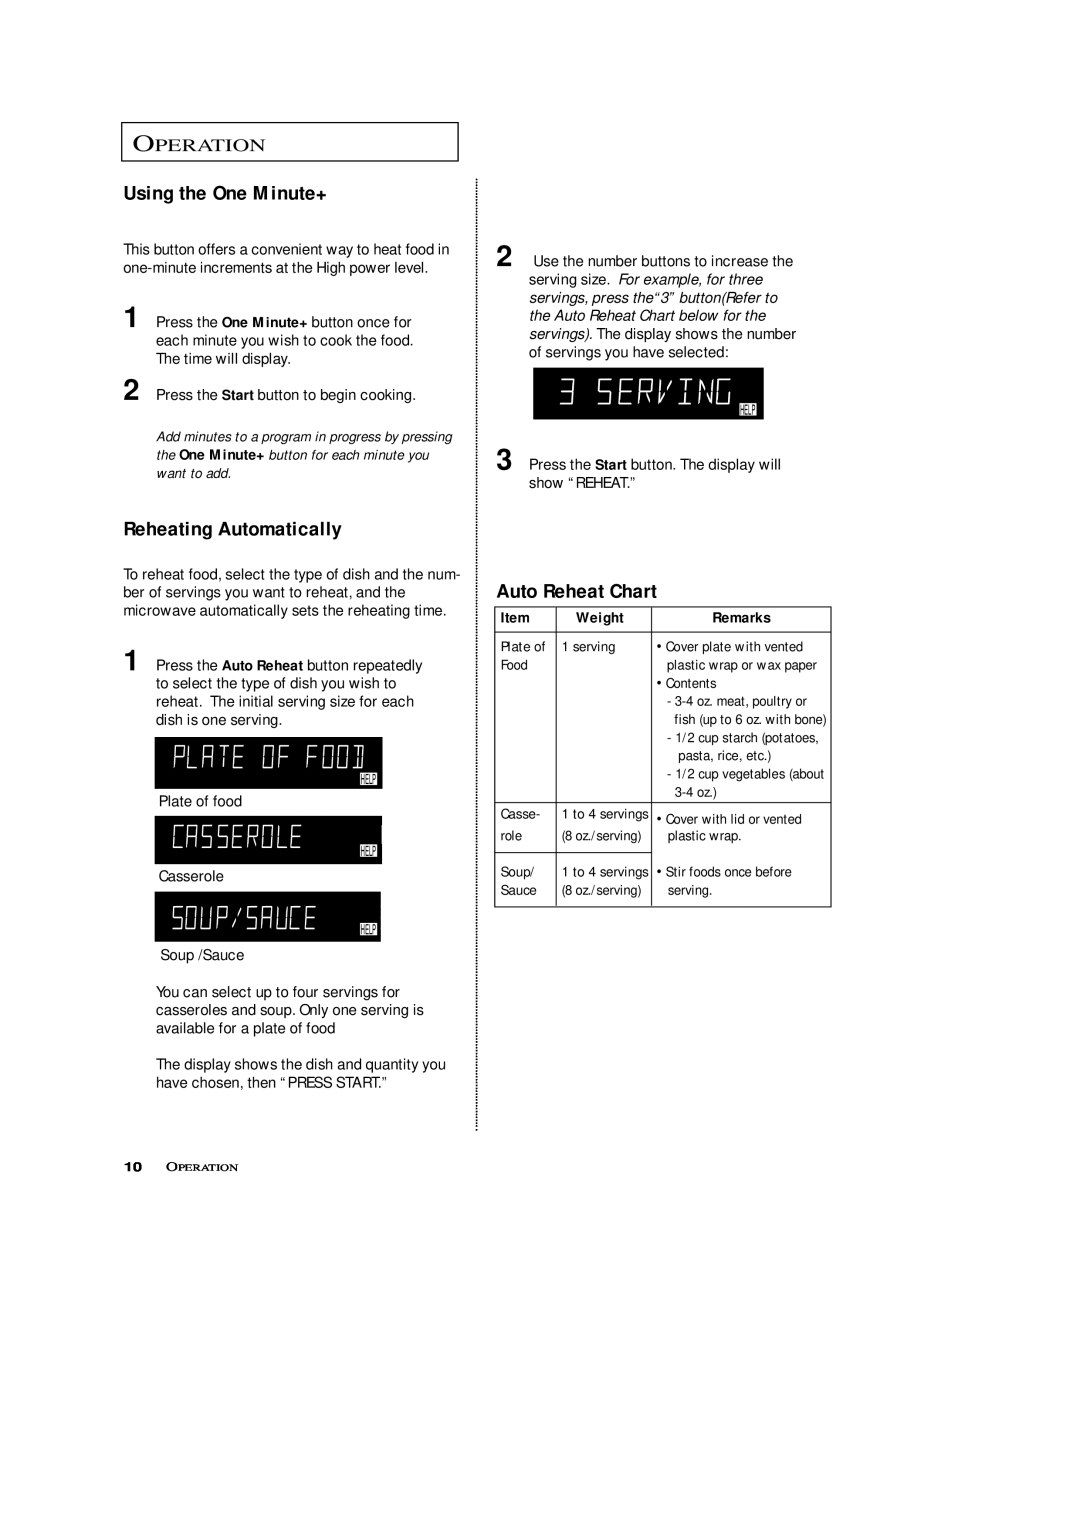 Samsung SRH1230ZG owner manual Using the One Minute+, Reheating Automatically, Auto Reheat Chart, Operation 